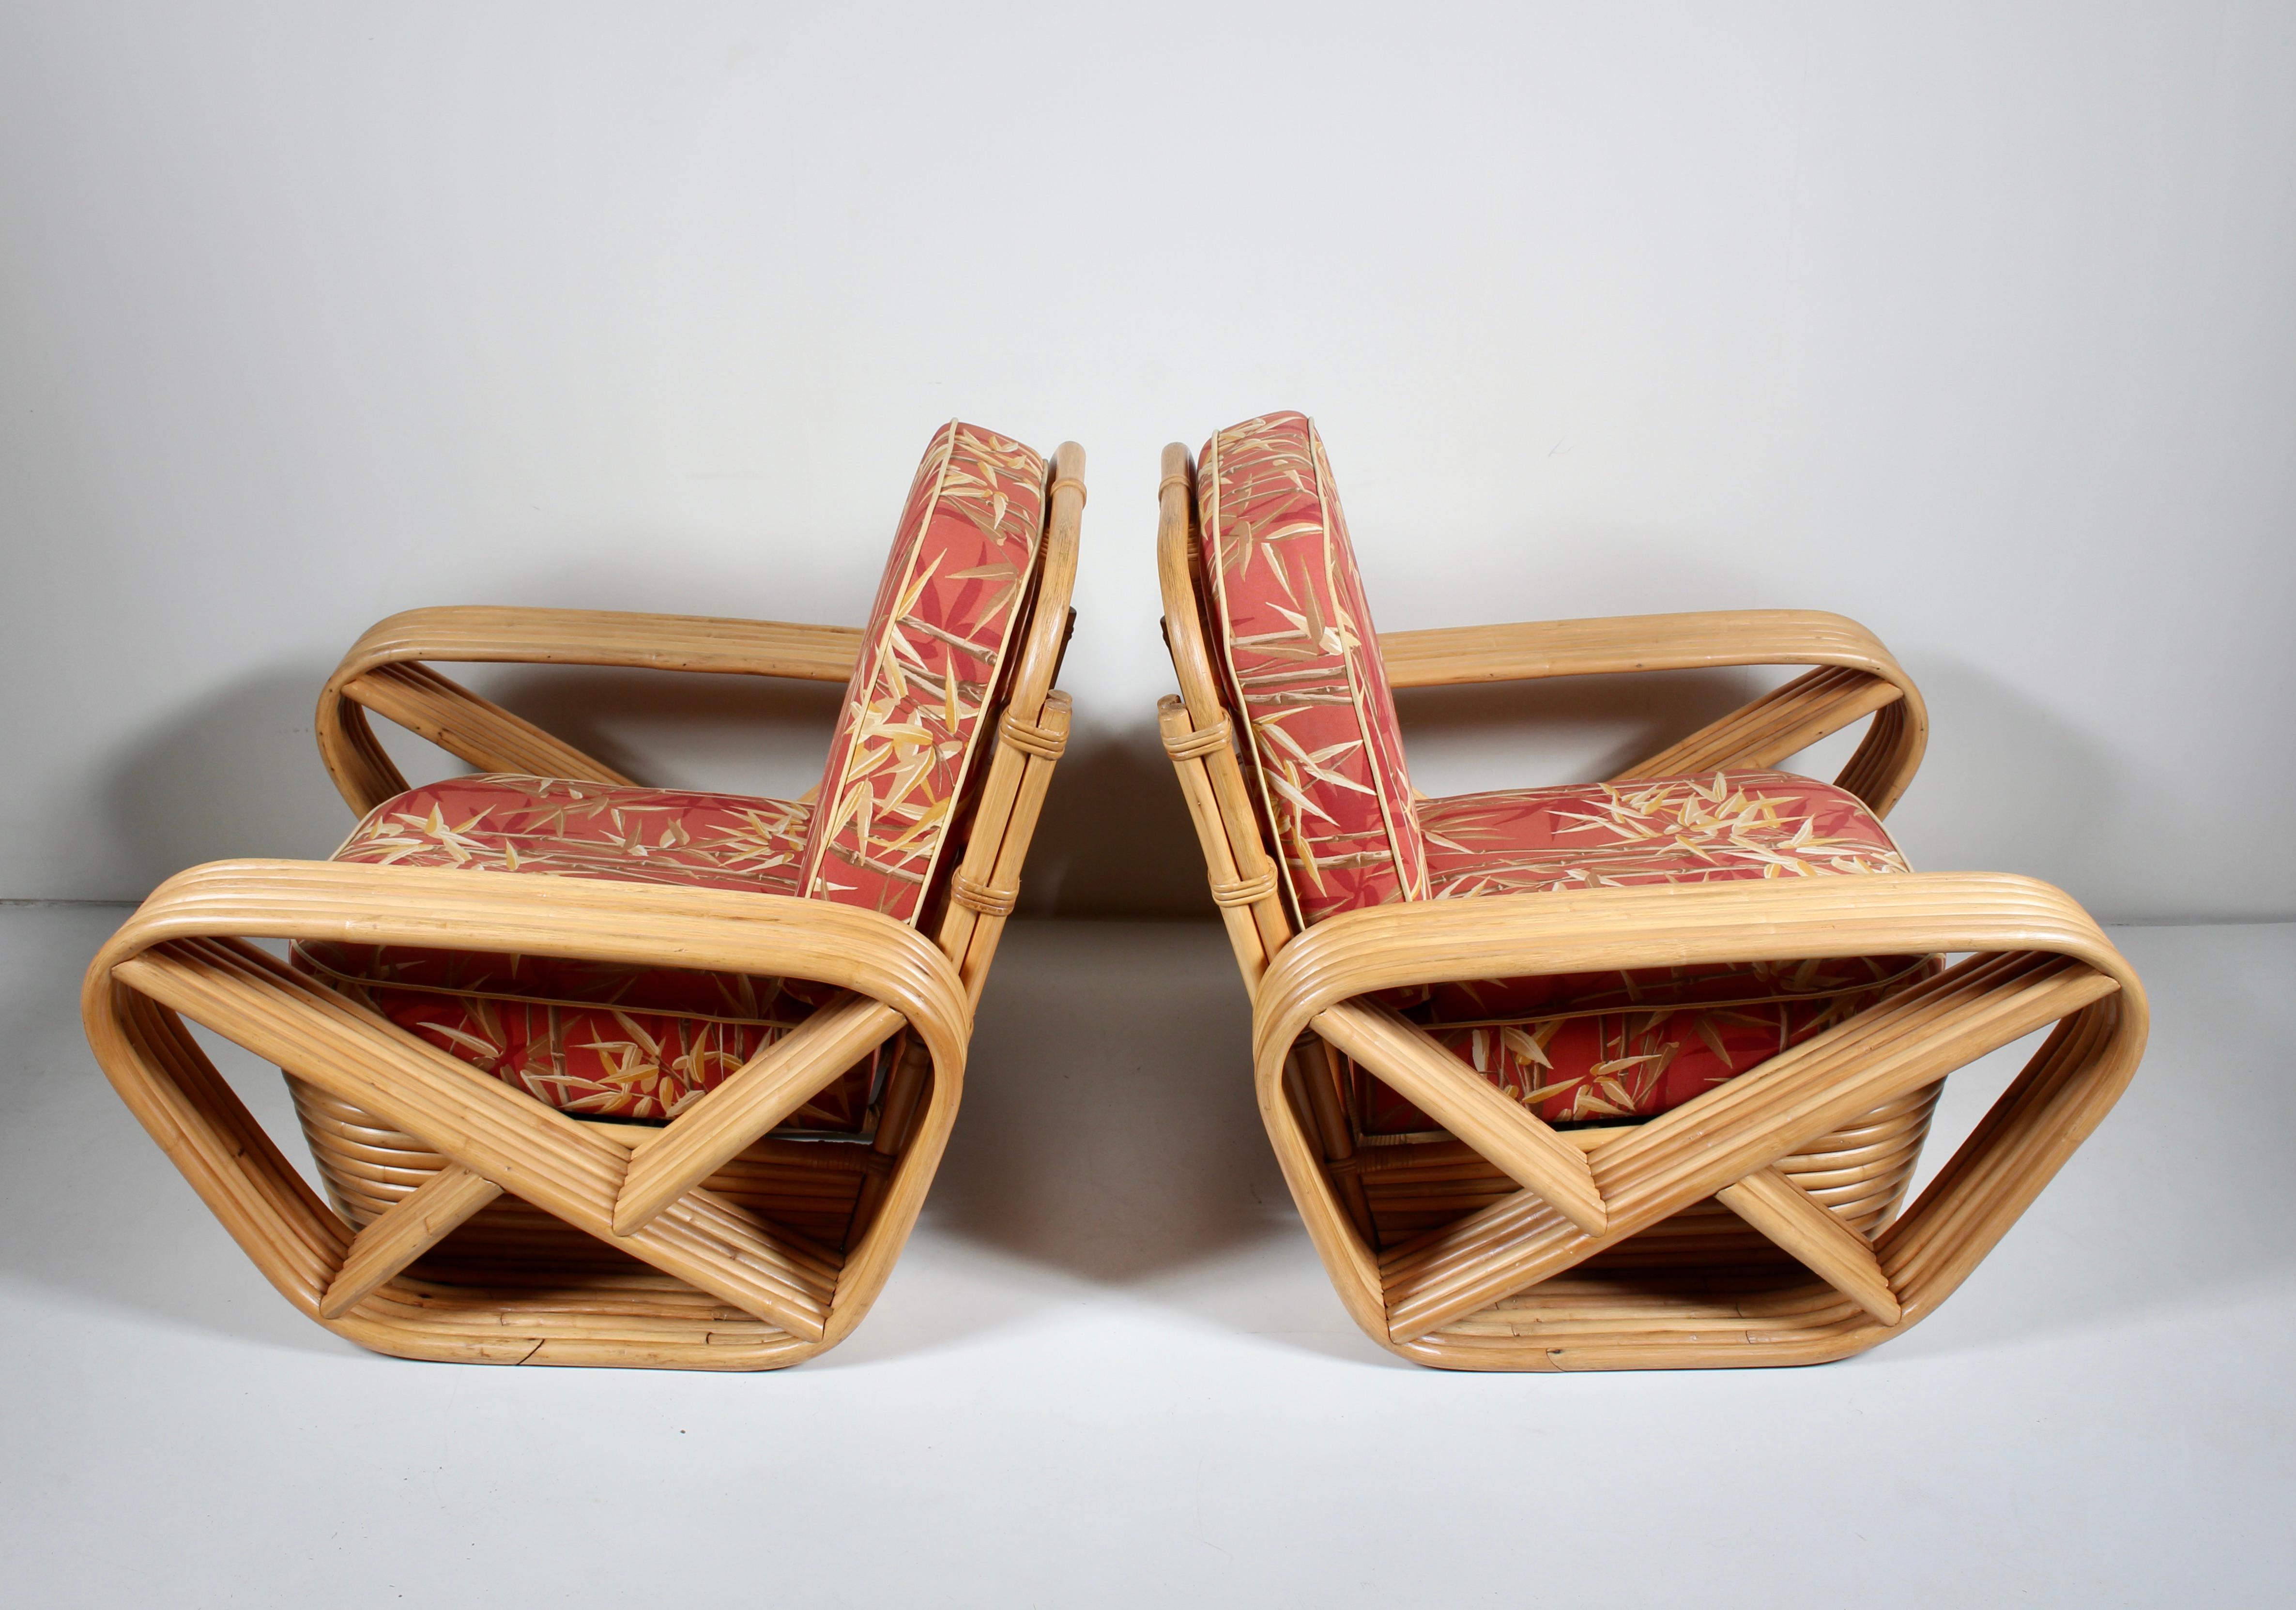 Pair of Tochiku Industry LTD for Paul Frankl Six Strand Bamboo and Rattan Lounge Chairs.  Featuring square steam bent stacked Bamboo strand frame, wrapped Rattan, wide seats, supported ergonomic back, six bands of Bamboo across on each arm rest, and